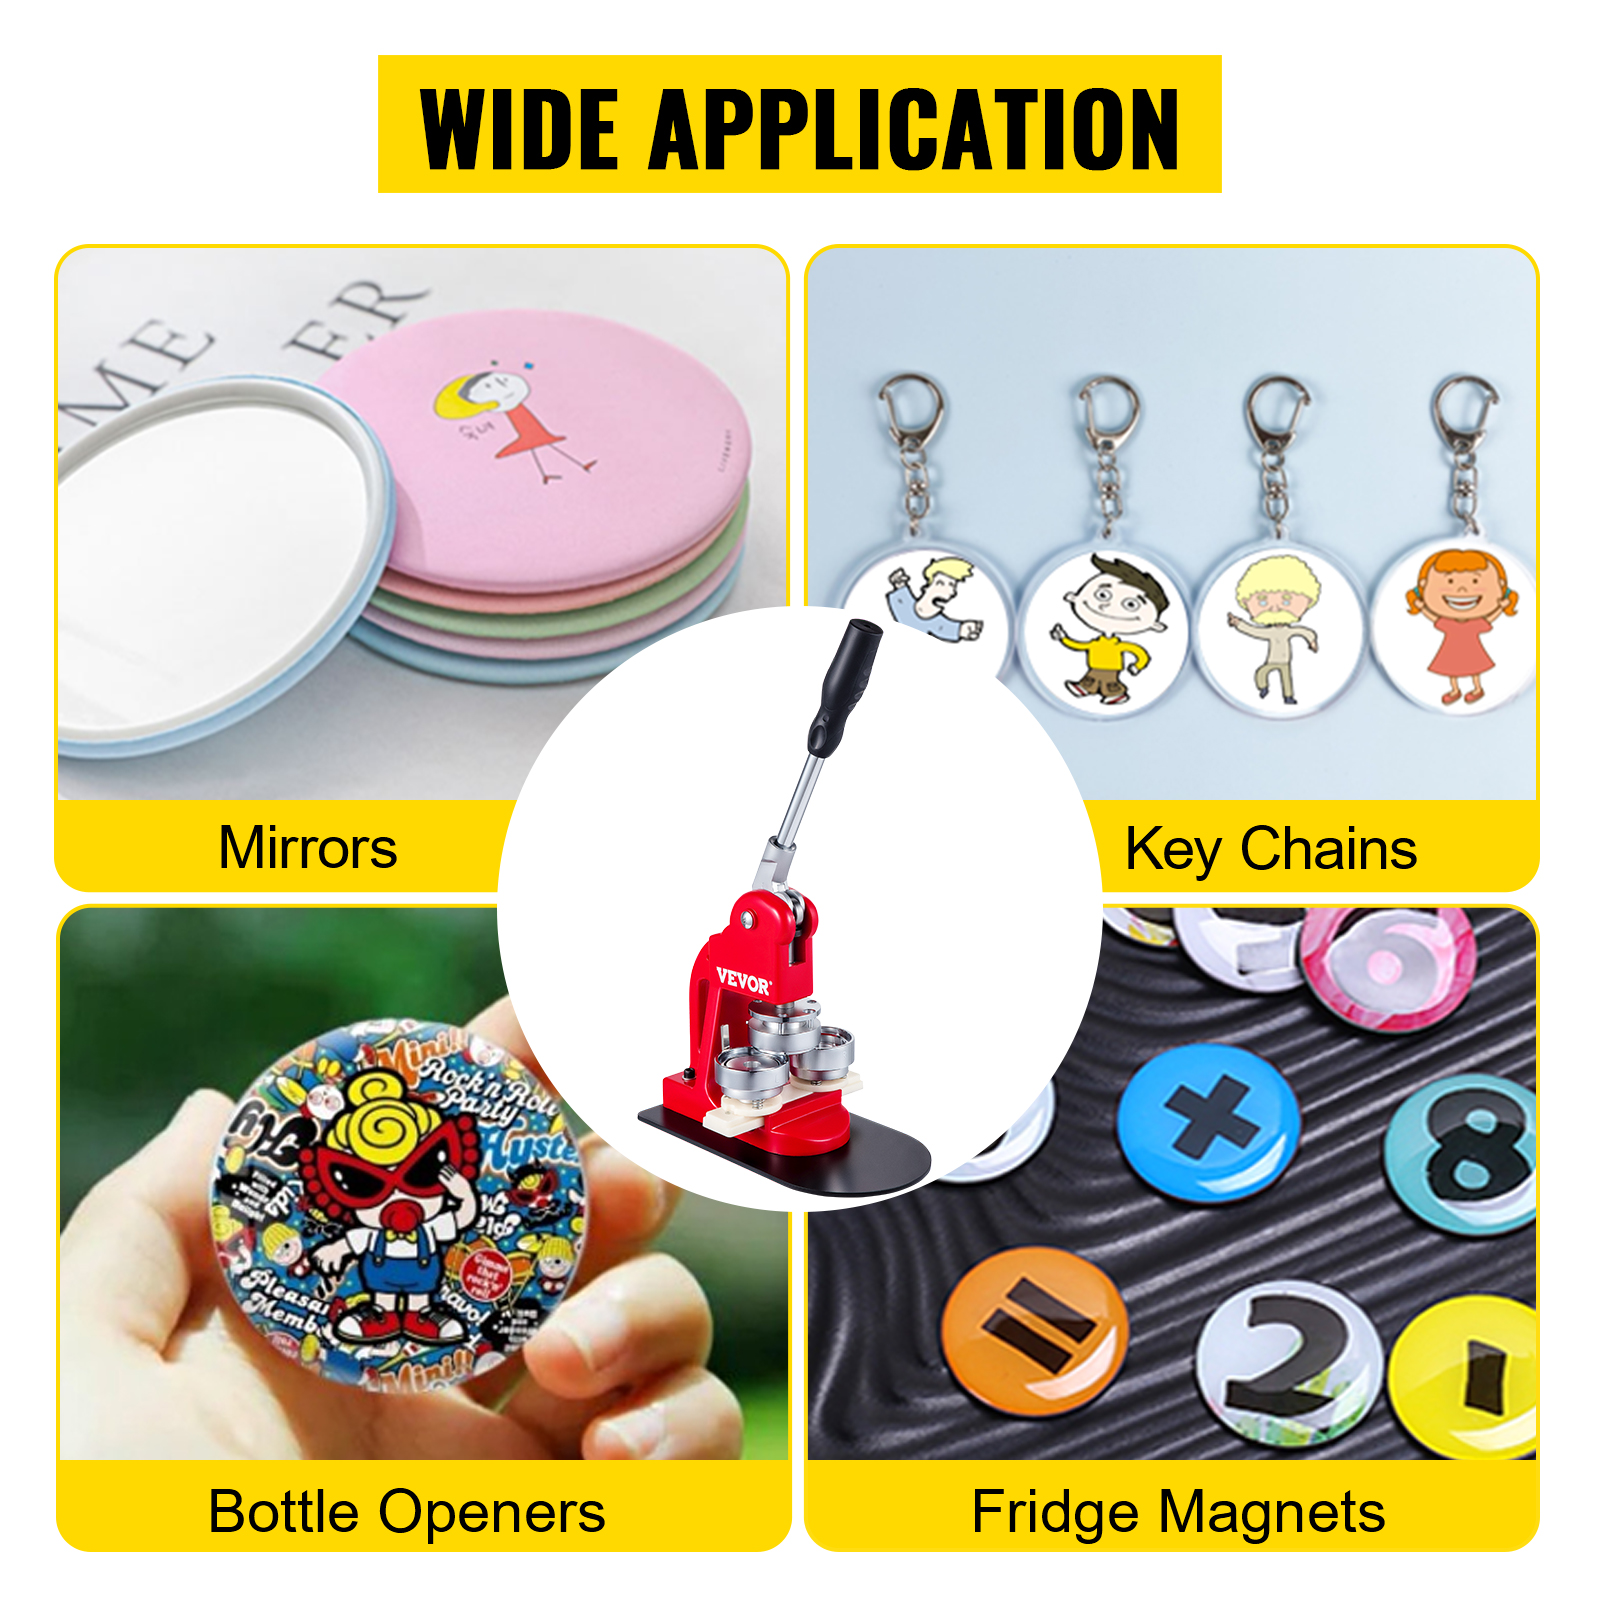 VEVOR Button Maker 1/1.25/2.28 inch(25/32/58mm) 3-in-1 Pin Maker with 300pcs Button Parts Button Maker Machine with Panda Magic Book Ergonomic Arc